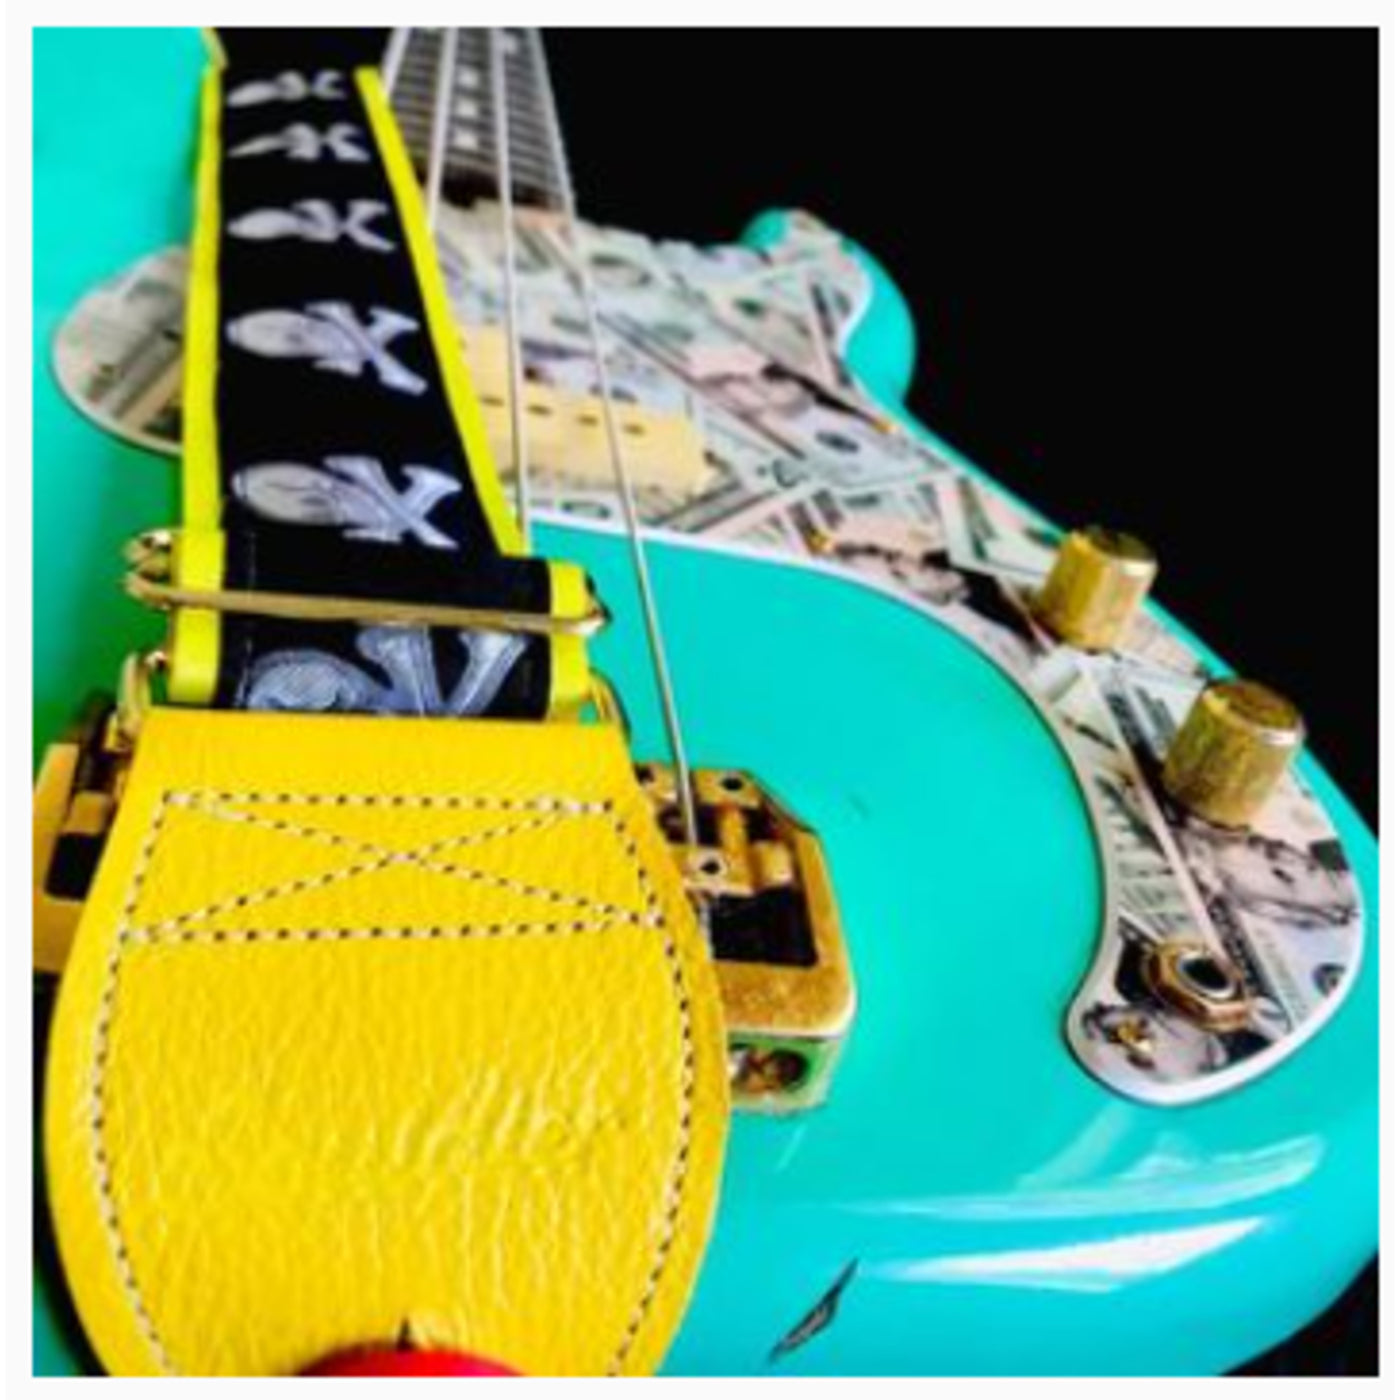 Souldier GS0344WH02WH - Handmade Seatbelt Guitar Strap for Bass, Electric or Acoustic Guitar, 2 Inches Wide and Adjustable Length from 30" to 63"  Made in the USA, Young Peace Dove, Blue